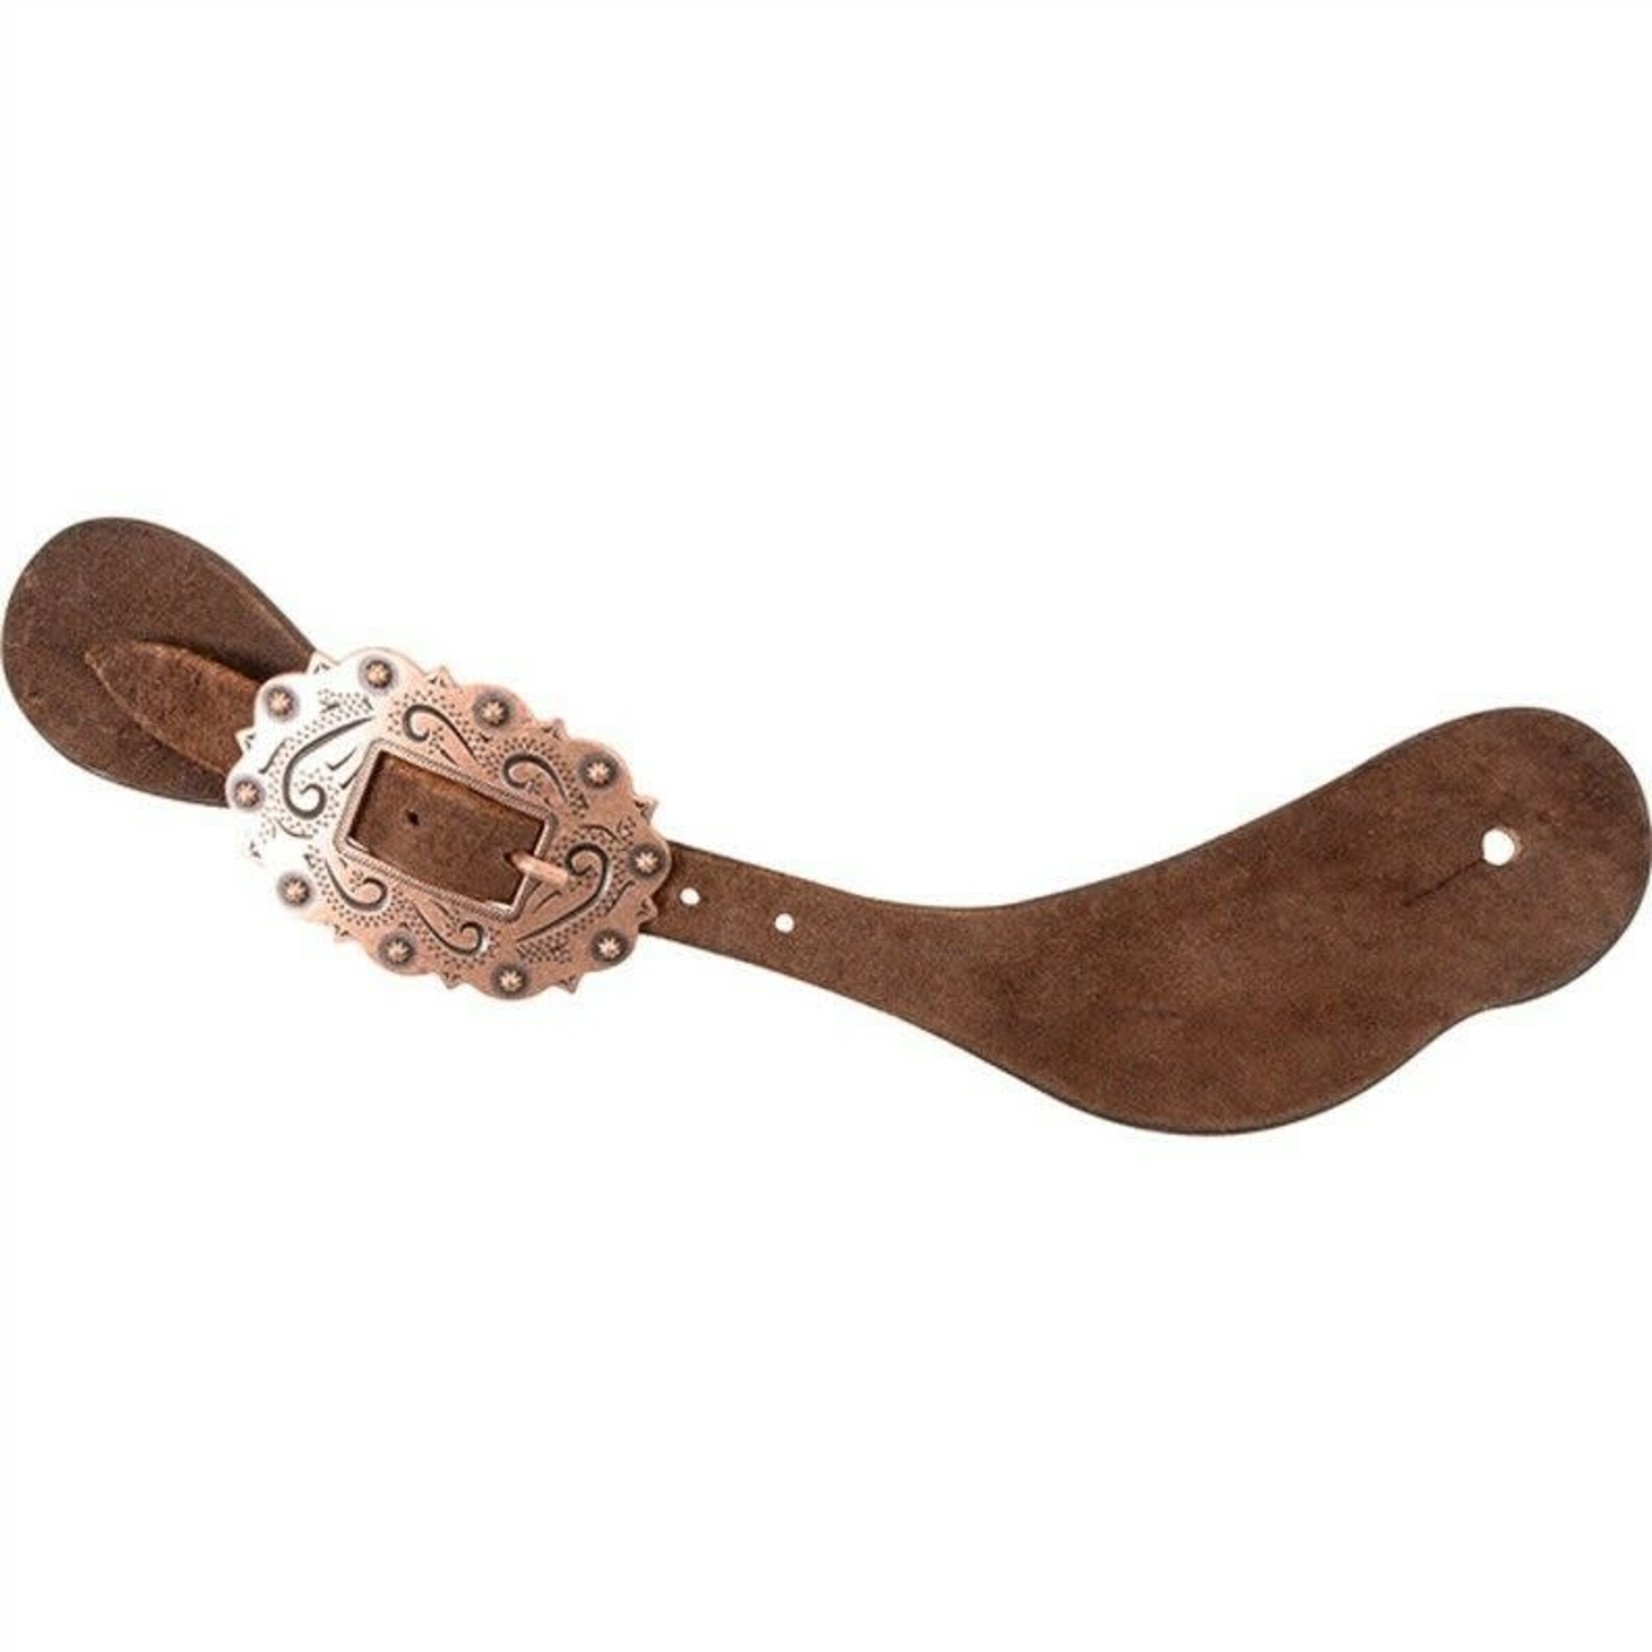 Martin Saddlery MS Spur Strap Roughout Copper Buckle Chocolate